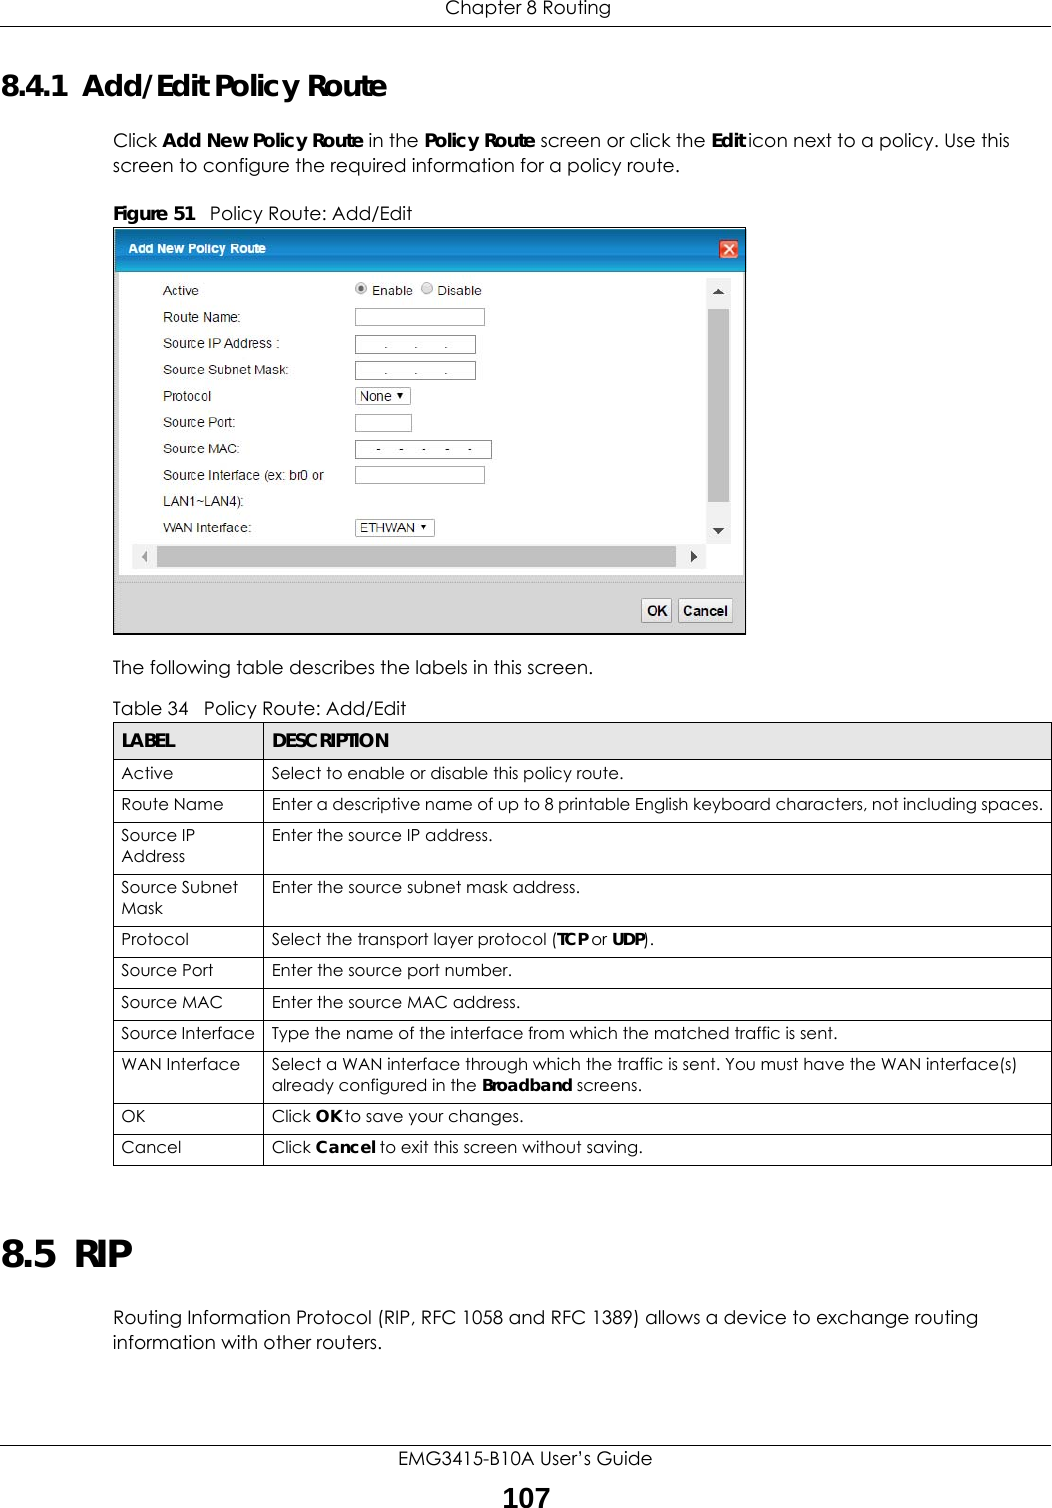  Chapter 8 RoutingEMG3415-B10A User’s Guide1078.4.1  Add/Edit Policy Route Click Add New Policy Route in the Policy Route screen or click the Edit icon next to a policy. Use this screen to configure the required information for a policy route.Figure 51   Policy Route: Add/Edit The following table describes the labels in this screen. 8.5  RIP    Routing Information Protocol (RIP, RFC 1058 and RFC 1389) allows a device to exchange routing information with other routers.Table 34   Policy Route: Add/EditLABEL DESCRIPTIONActive Select to enable or disable this policy route.Route Name Enter a descriptive name of up to 8 printable English keyboard characters, not including spaces.Source IP AddressEnter the source IP address.Source Subnet MaskEnter the source subnet mask address. Protocol Select the transport layer protocol (TCP or UDP). Source Port  Enter the source port number. Source MAC  Enter the source MAC address. Source Interface Type the name of the interface from which the matched traffic is sent.WAN Interface Select a WAN interface through which the traffic is sent. You must have the WAN interface(s) already configured in the Broadband screens. OK Click OK to save your changes.Cancel Click Cancel to exit this screen without saving.